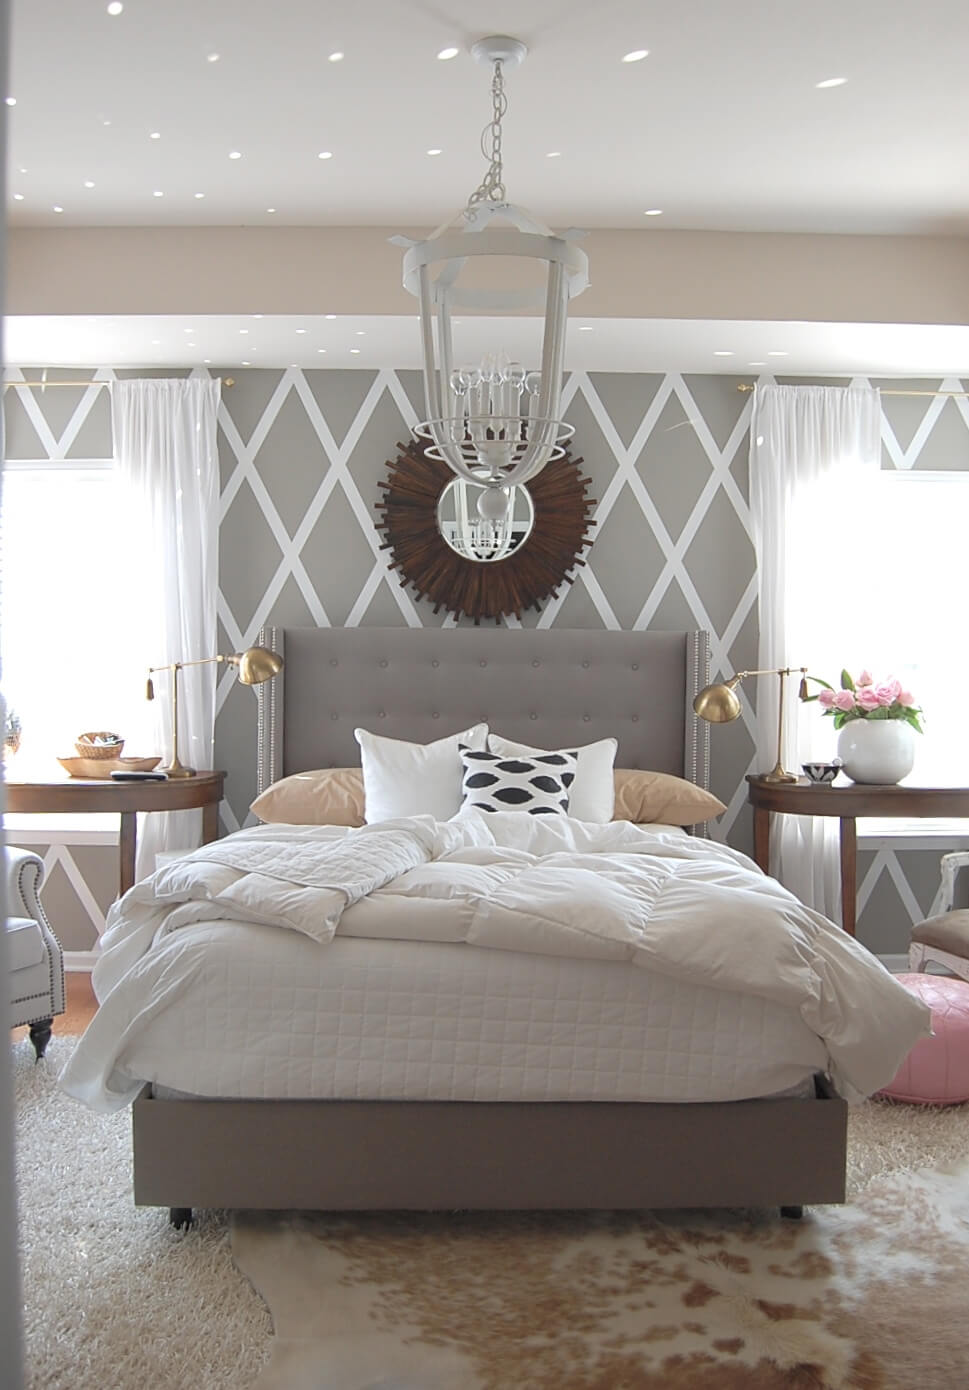 Geometric Patterns and Pastels Play Nicely in this Lush Grey Bedroom